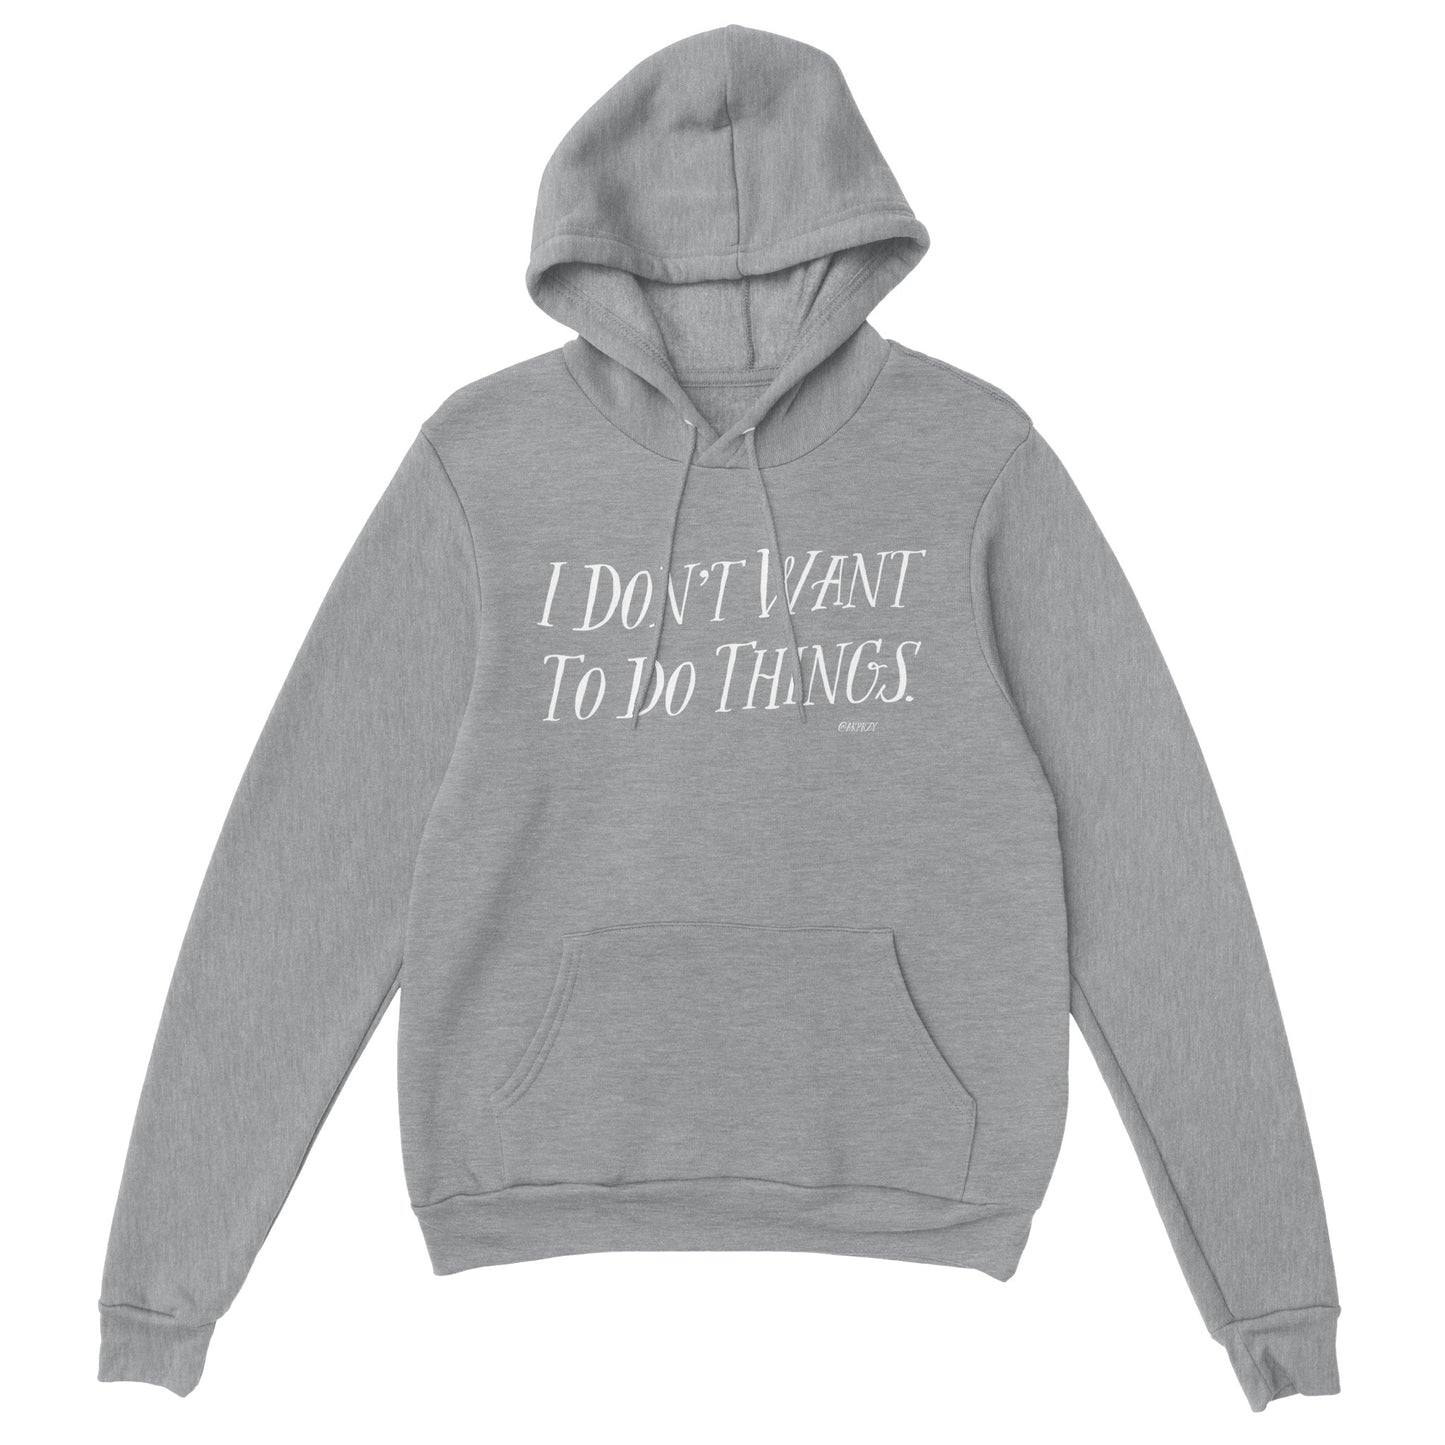 Premium Unisex Pullover Hoodie - I don't want to do things.